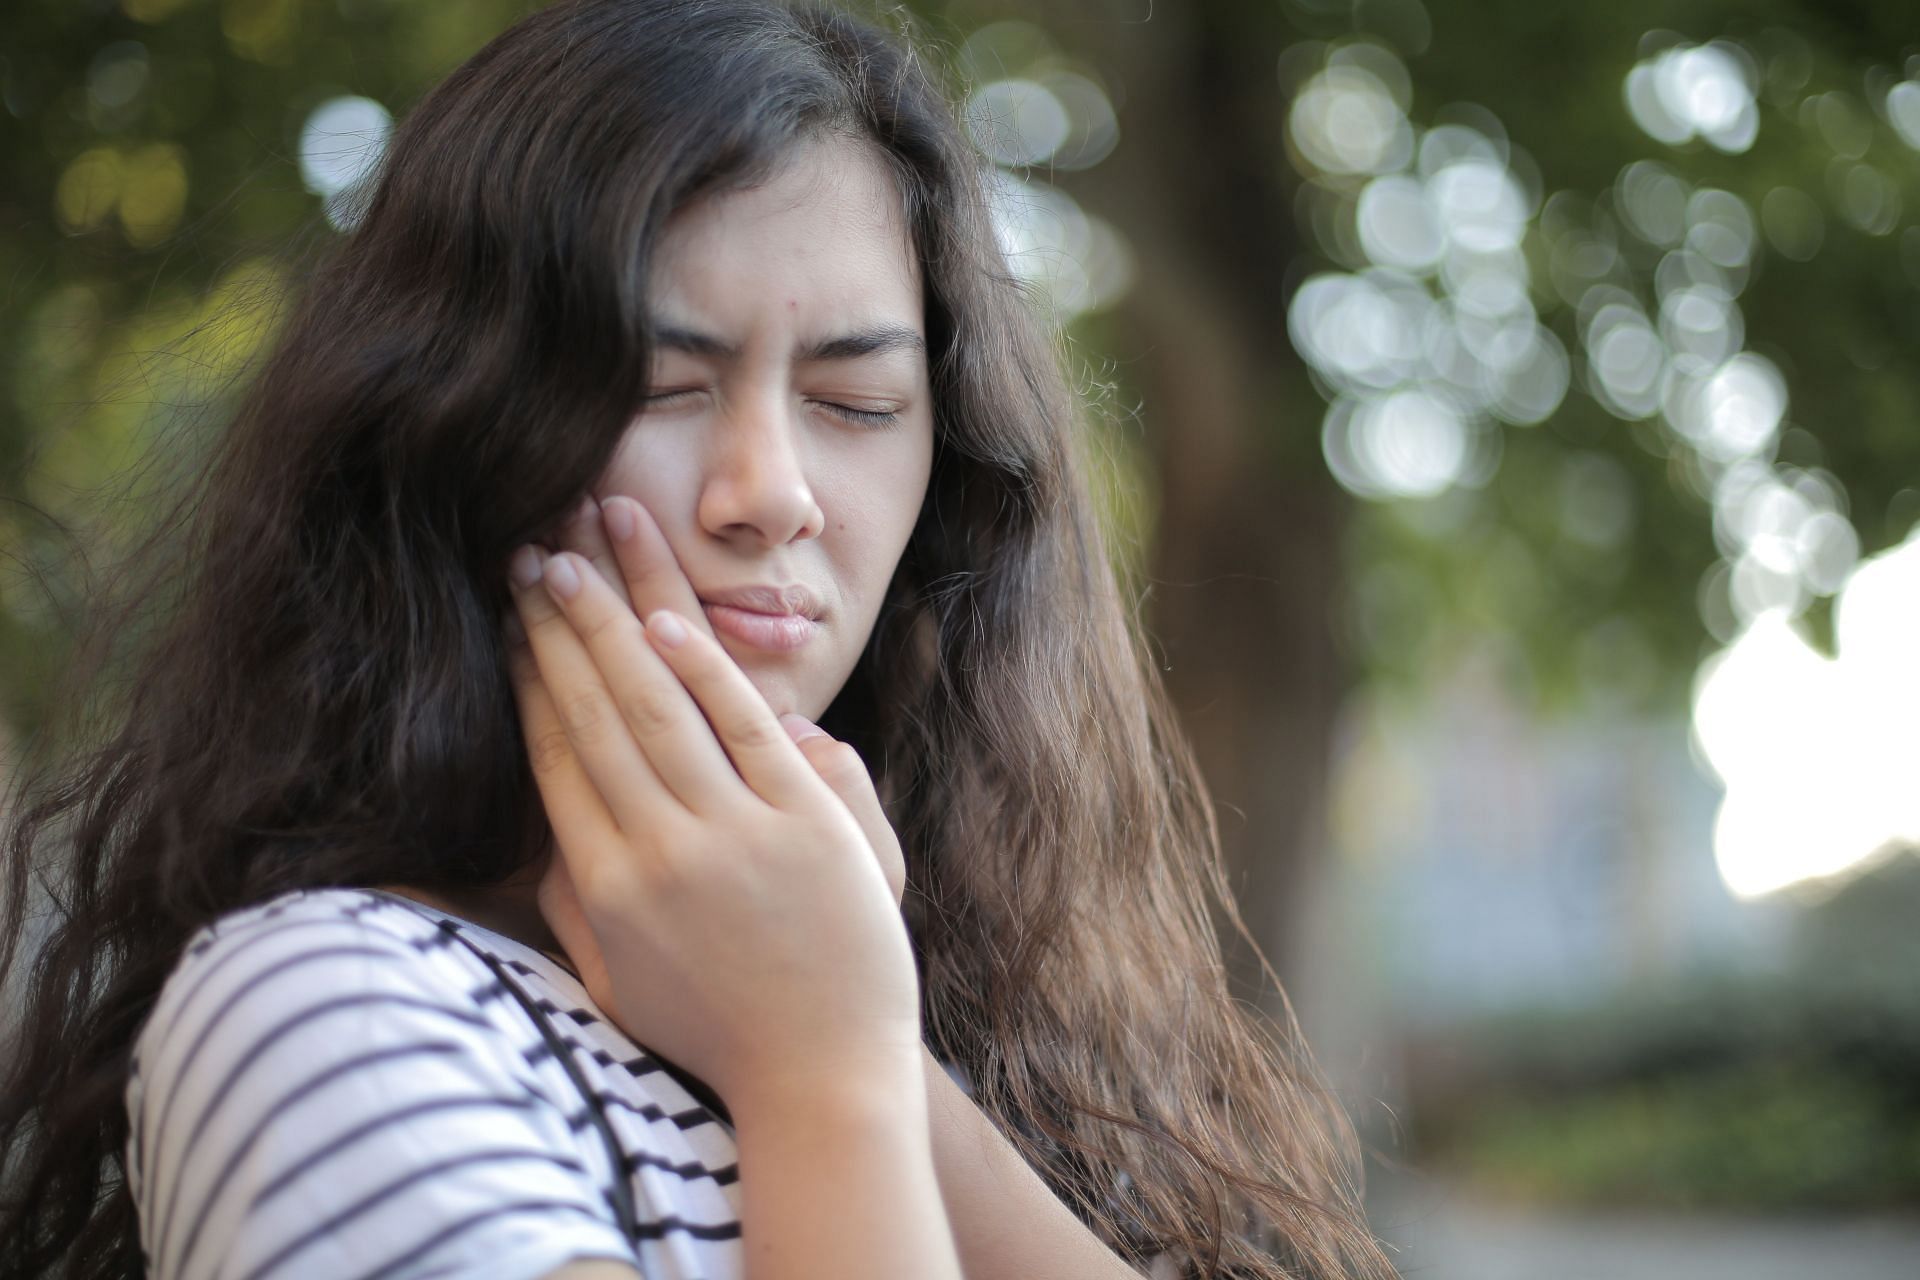 Swollen gums can cause problem with eating. (Image via Pexels/ Andrea Piacquadio)